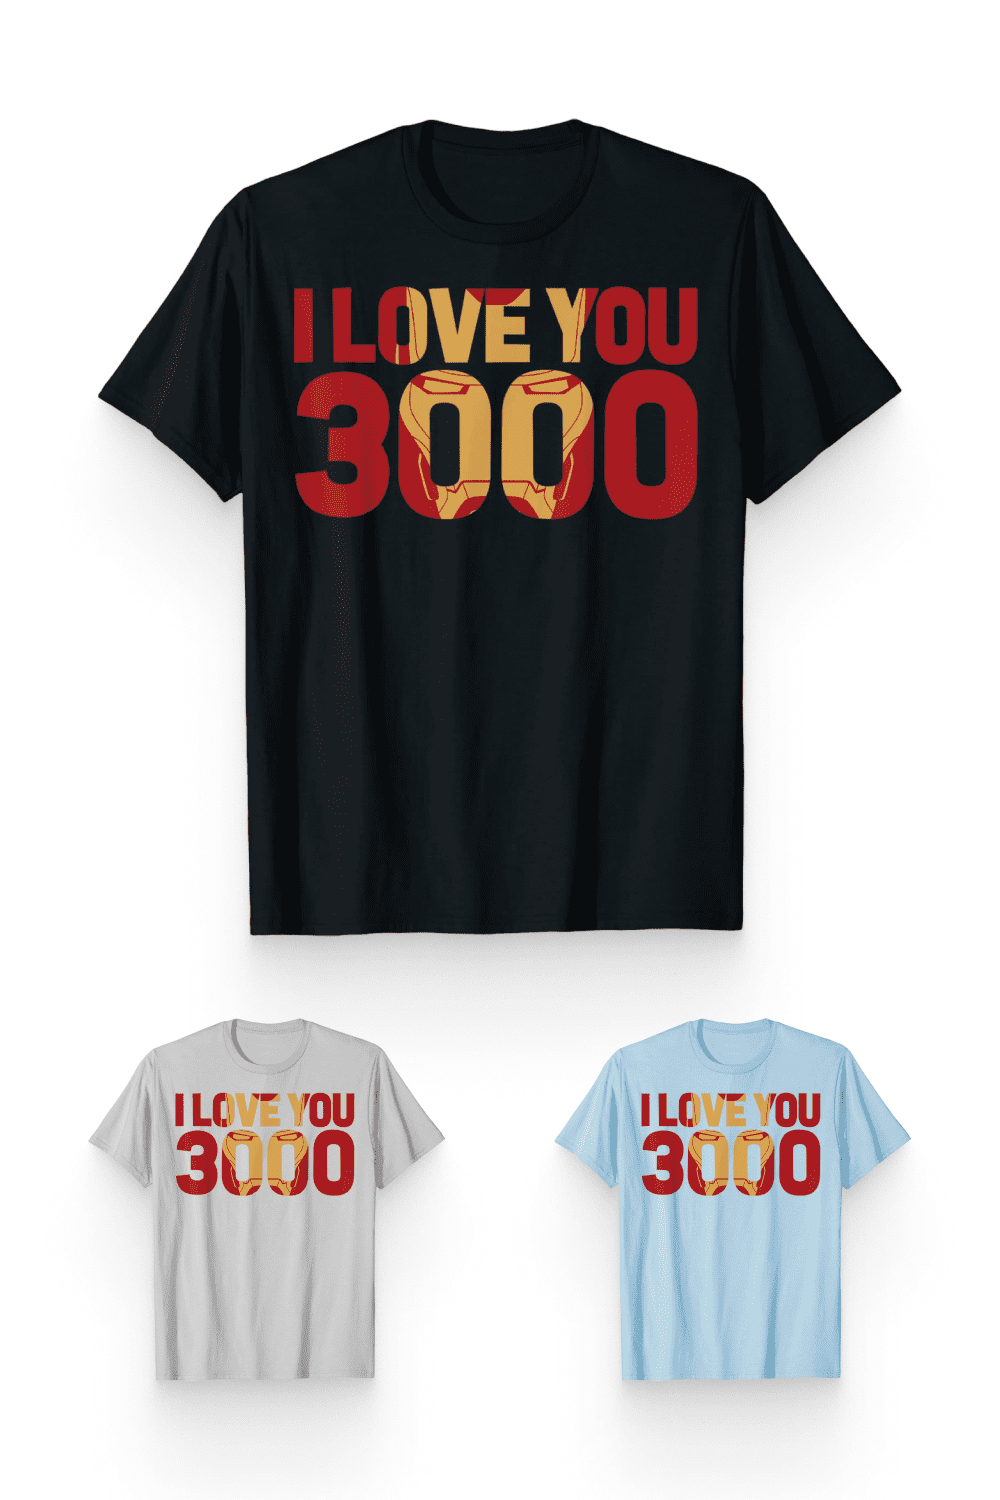 T-Shirts with text I Love You 3000.